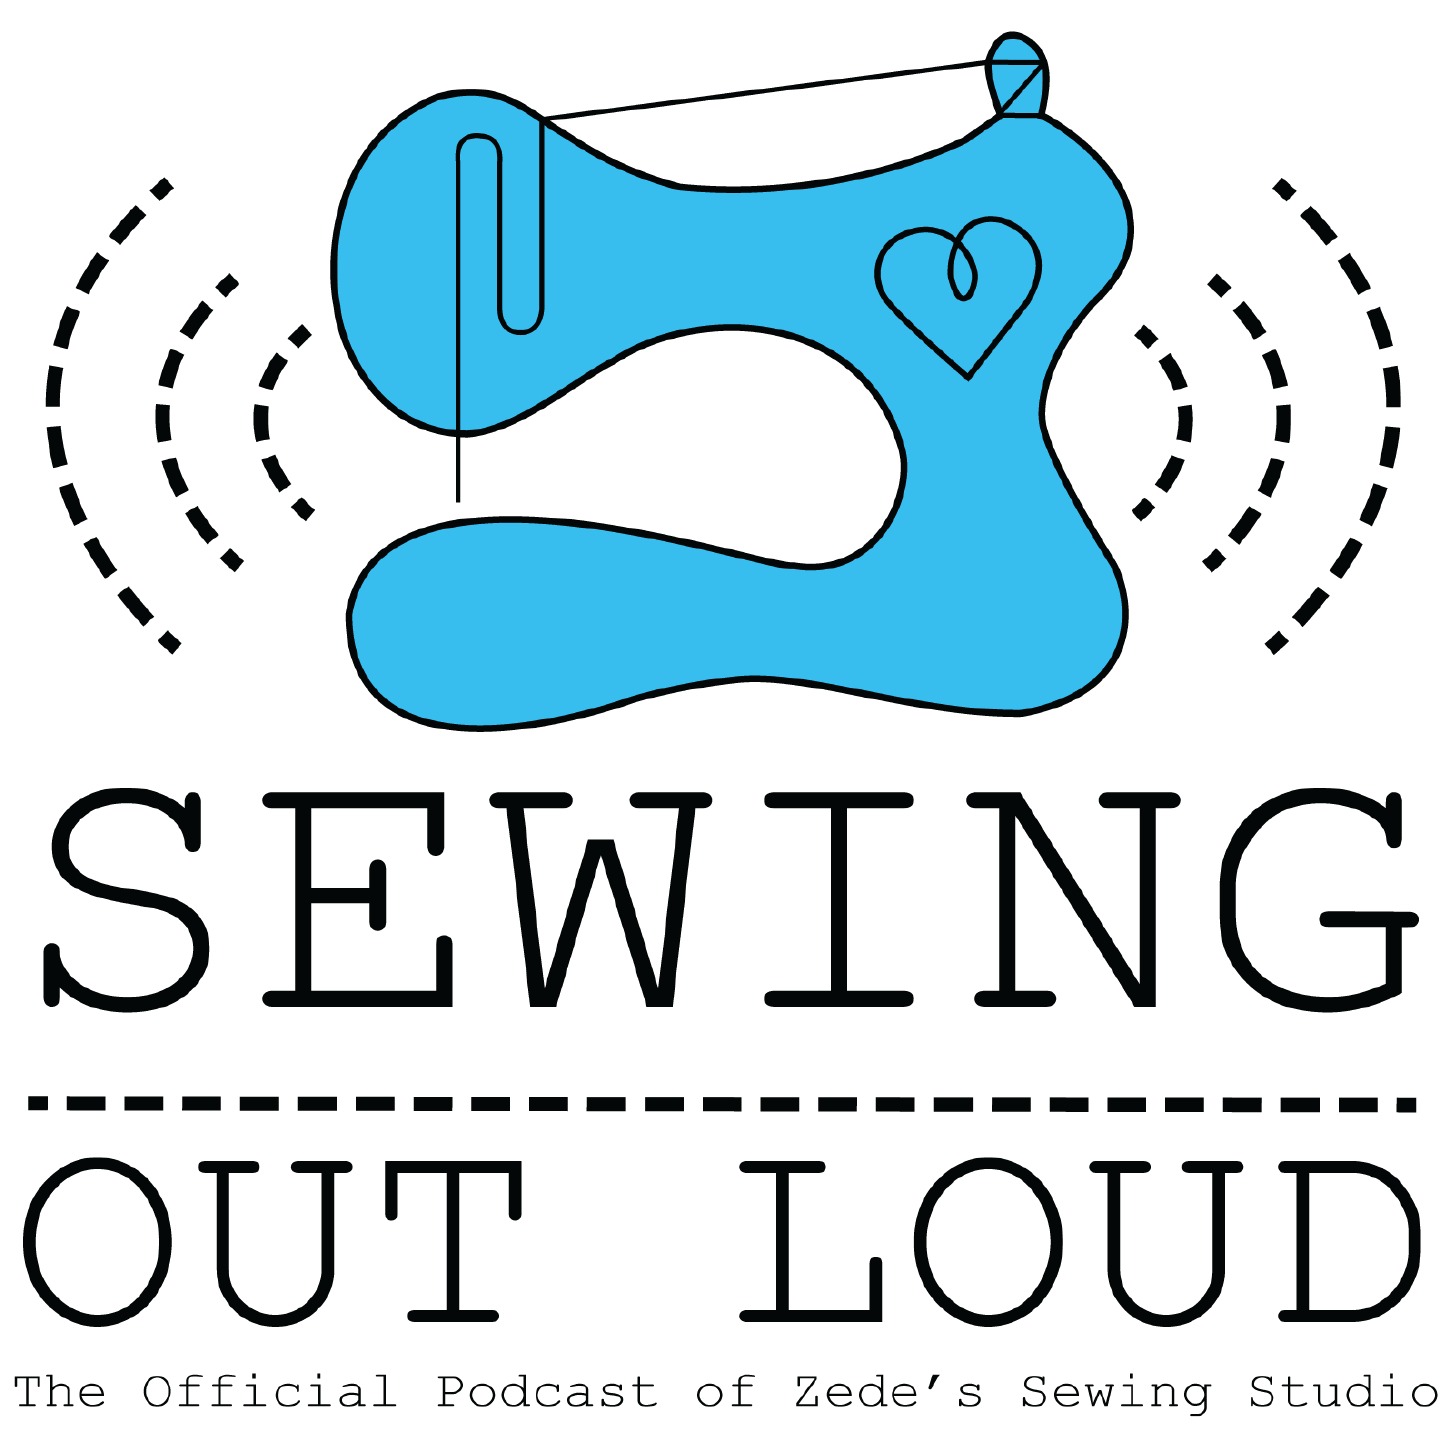 Upgrading Your Sewing Machine or Serger